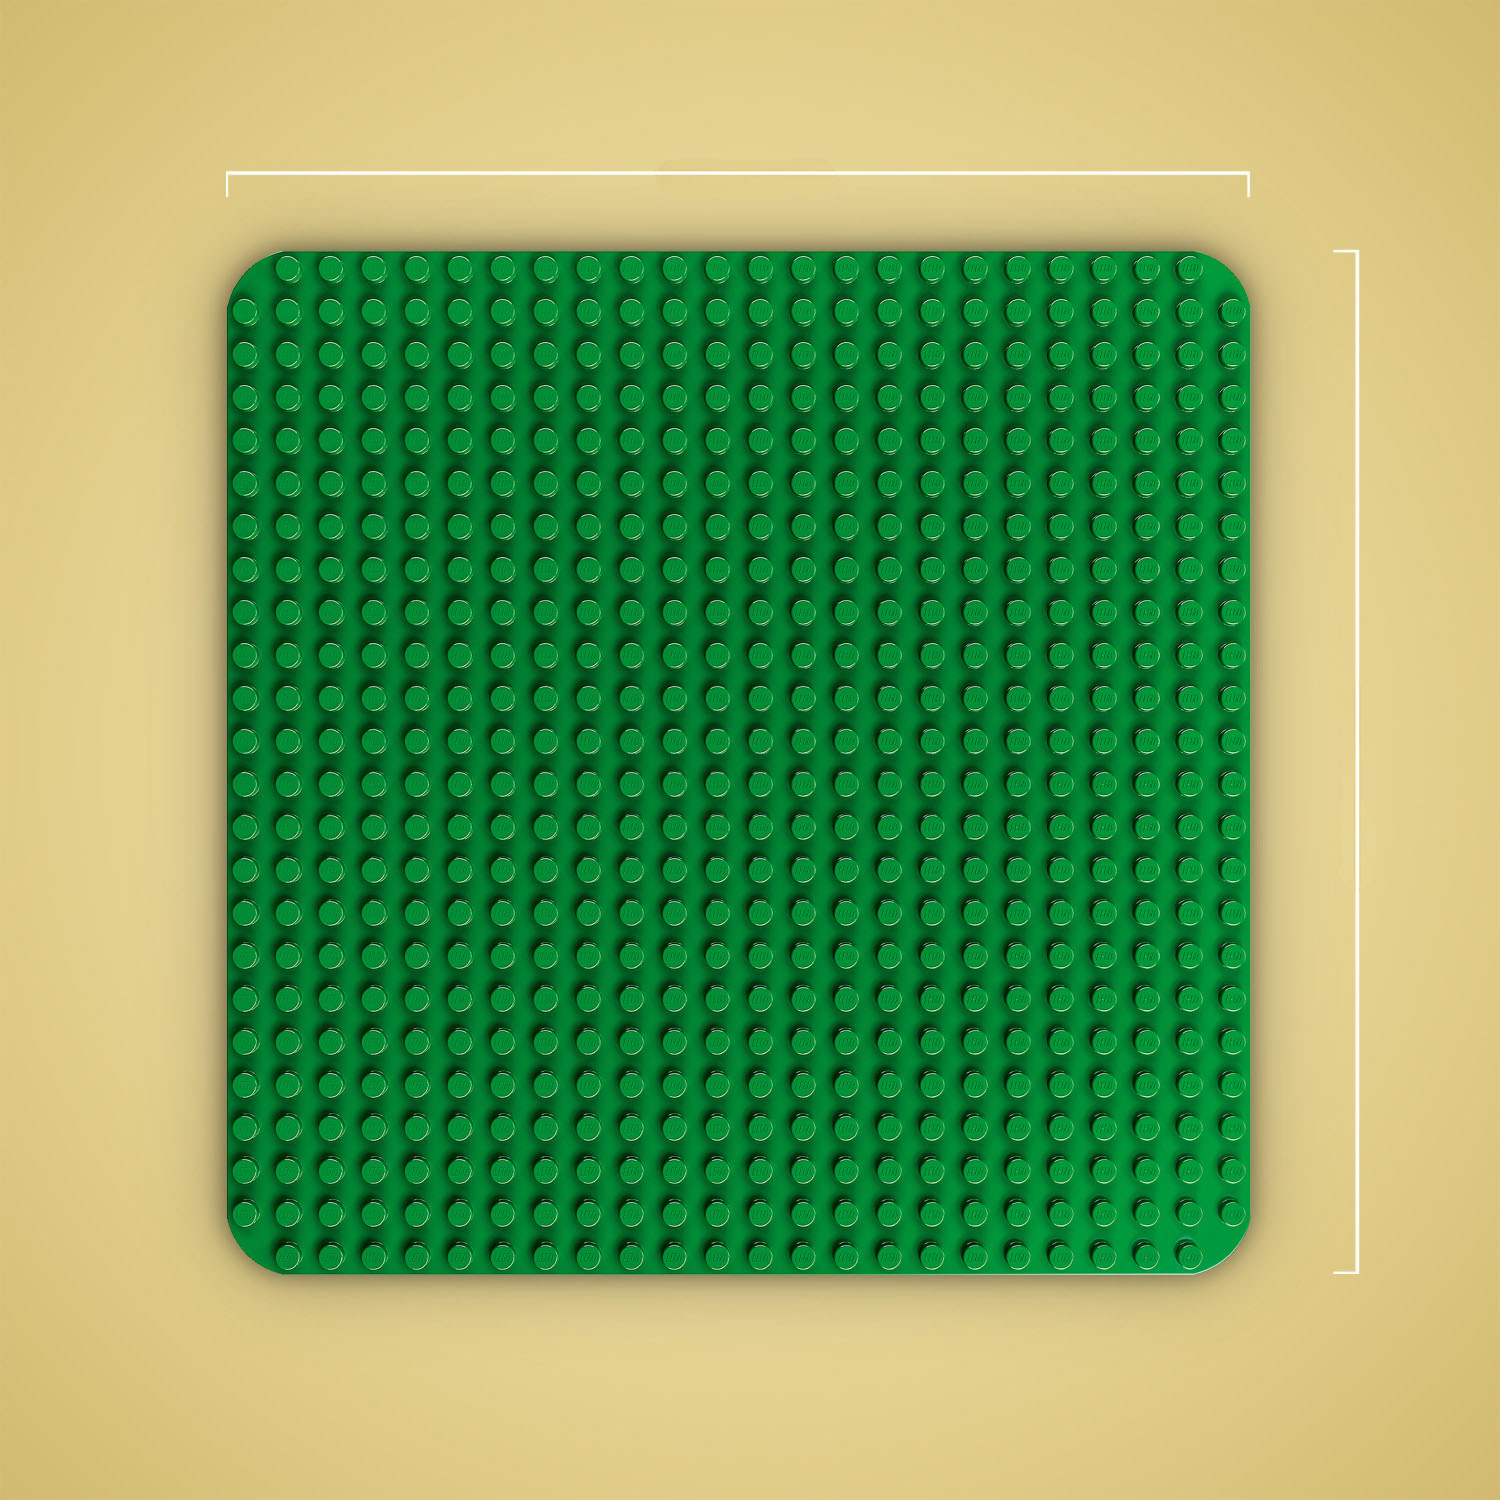 2 Lego Duplo Large Base Board Green Plate 15 x 15 24 x 24 Pegs Studs  34278